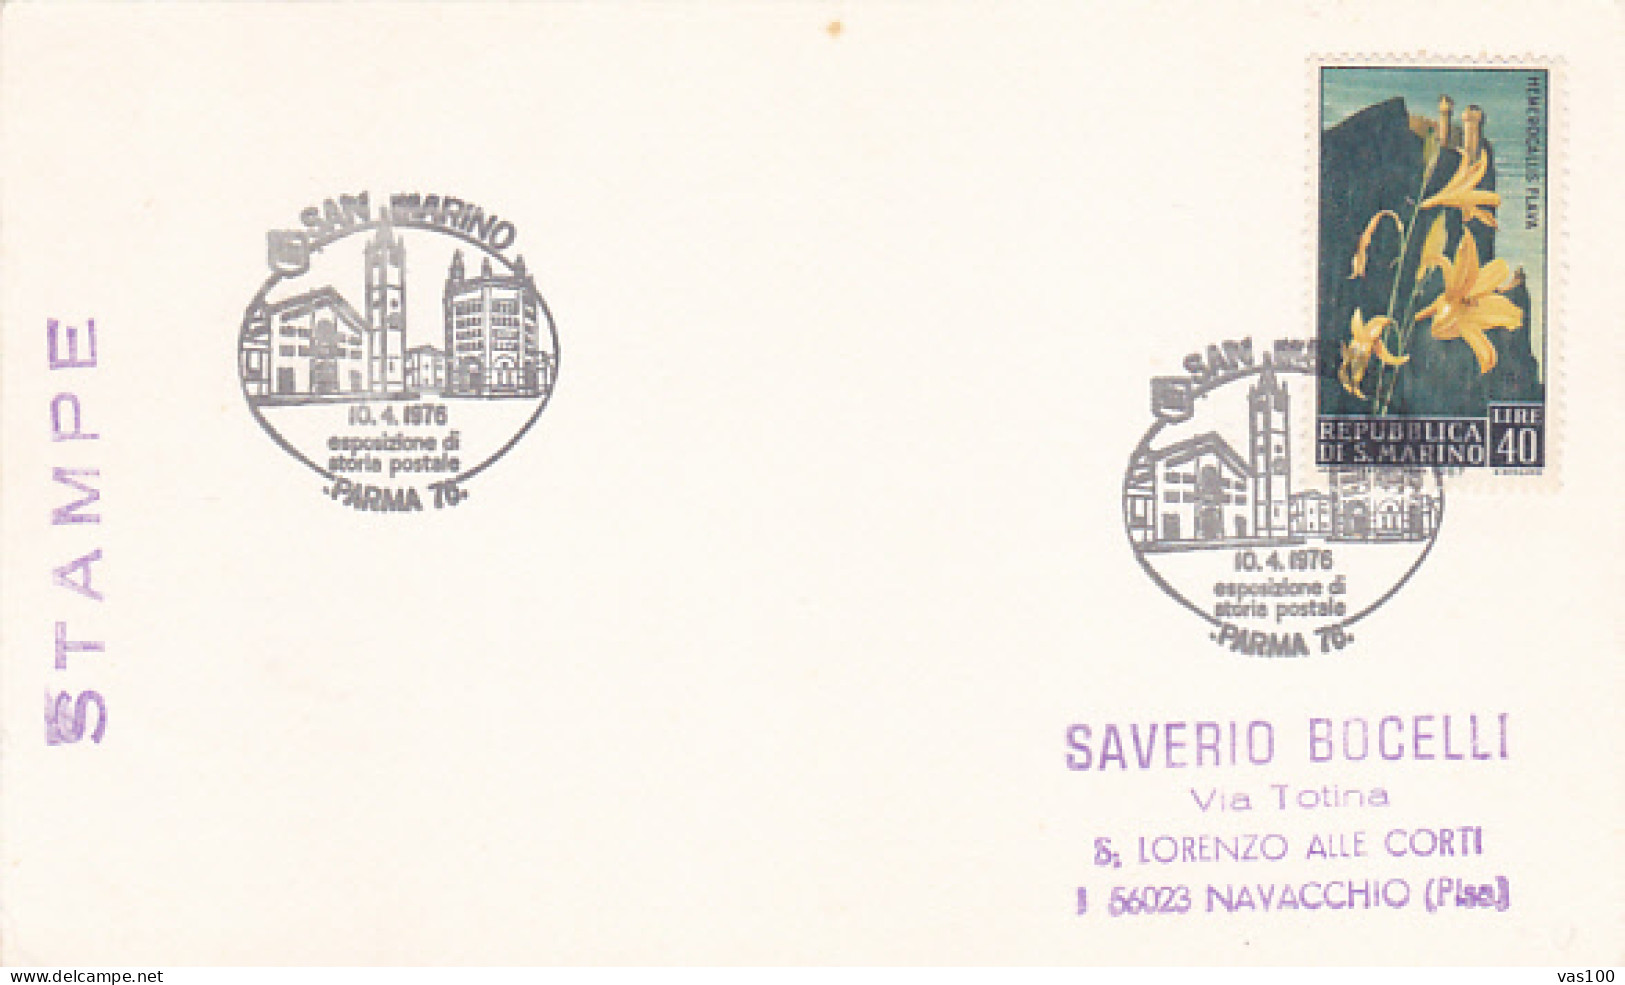 PARMA'76 POSTAL HISTORY EXHIBITION SPECIAL POSTMARKS, LILIES FLOWERS STAMP ON CARDBOARD, 1976, SAN MARINO - Lettres & Documents